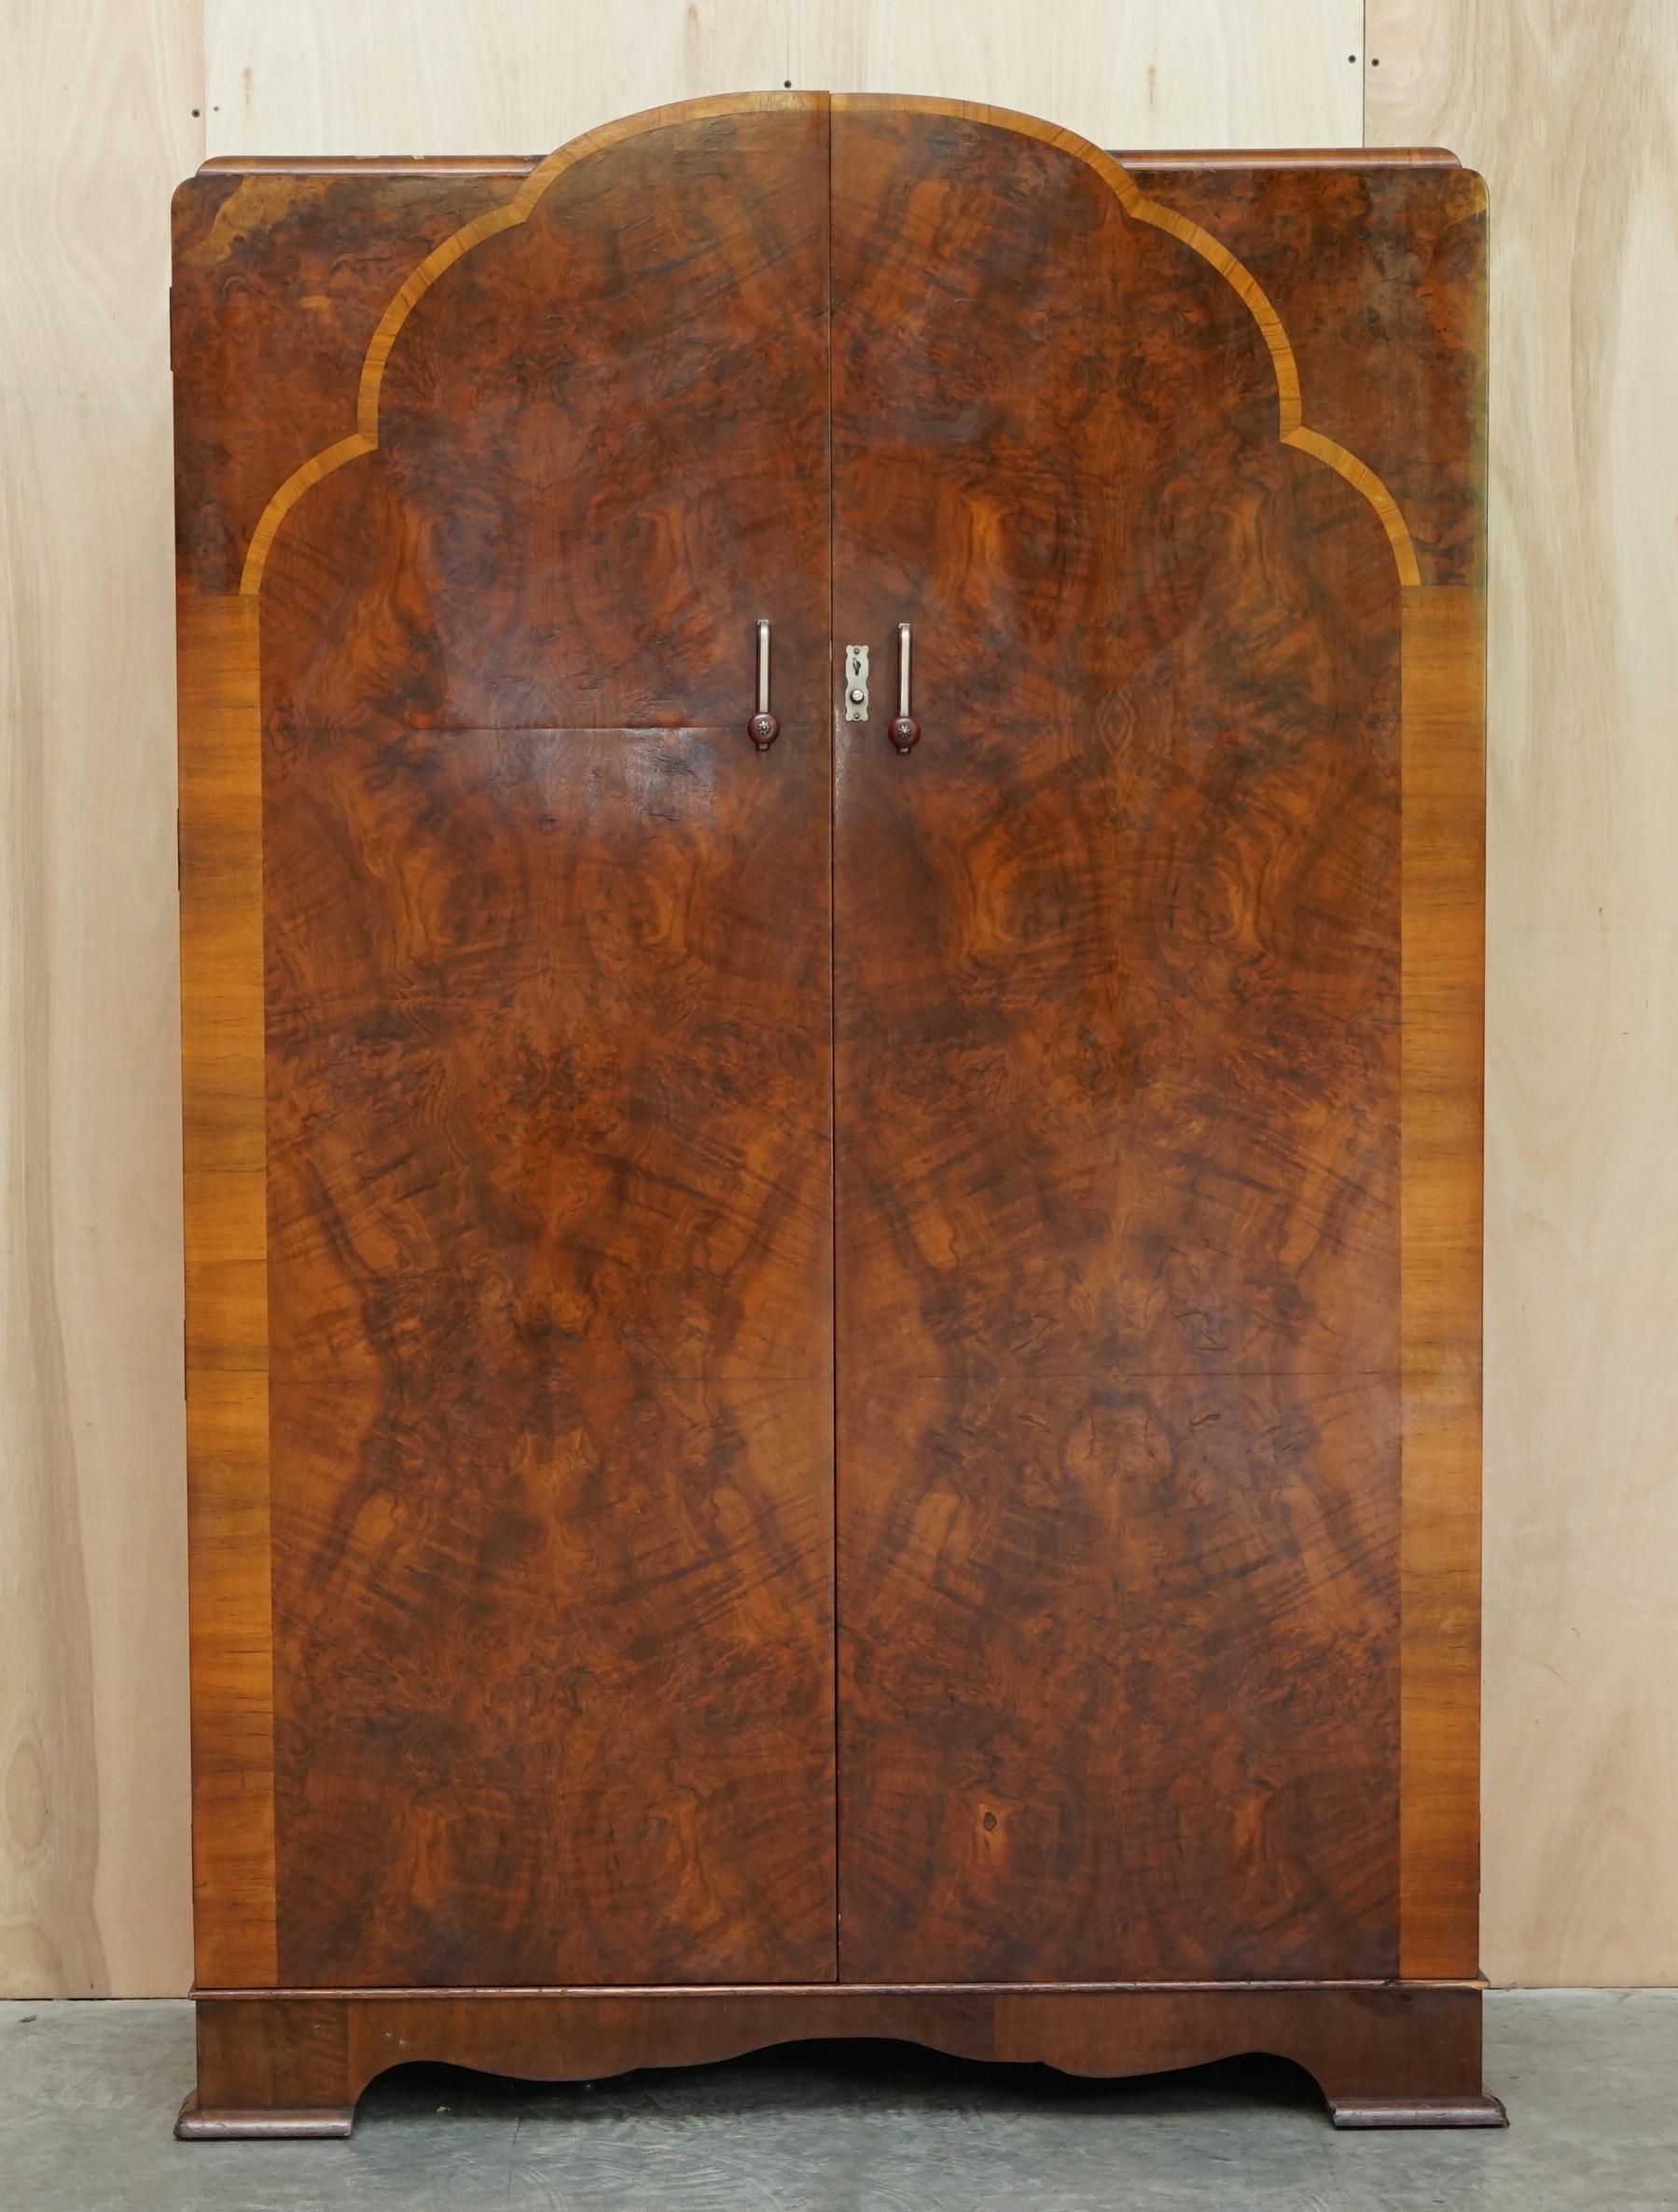 We are delighted to offer for sale this stunning, original circa 1920’s Art Deco large Wardrobe which is part of a suite

As mentioned this piece is part of a suite, in total I have a his and hers pair of wardrobes, the dressing table, one single